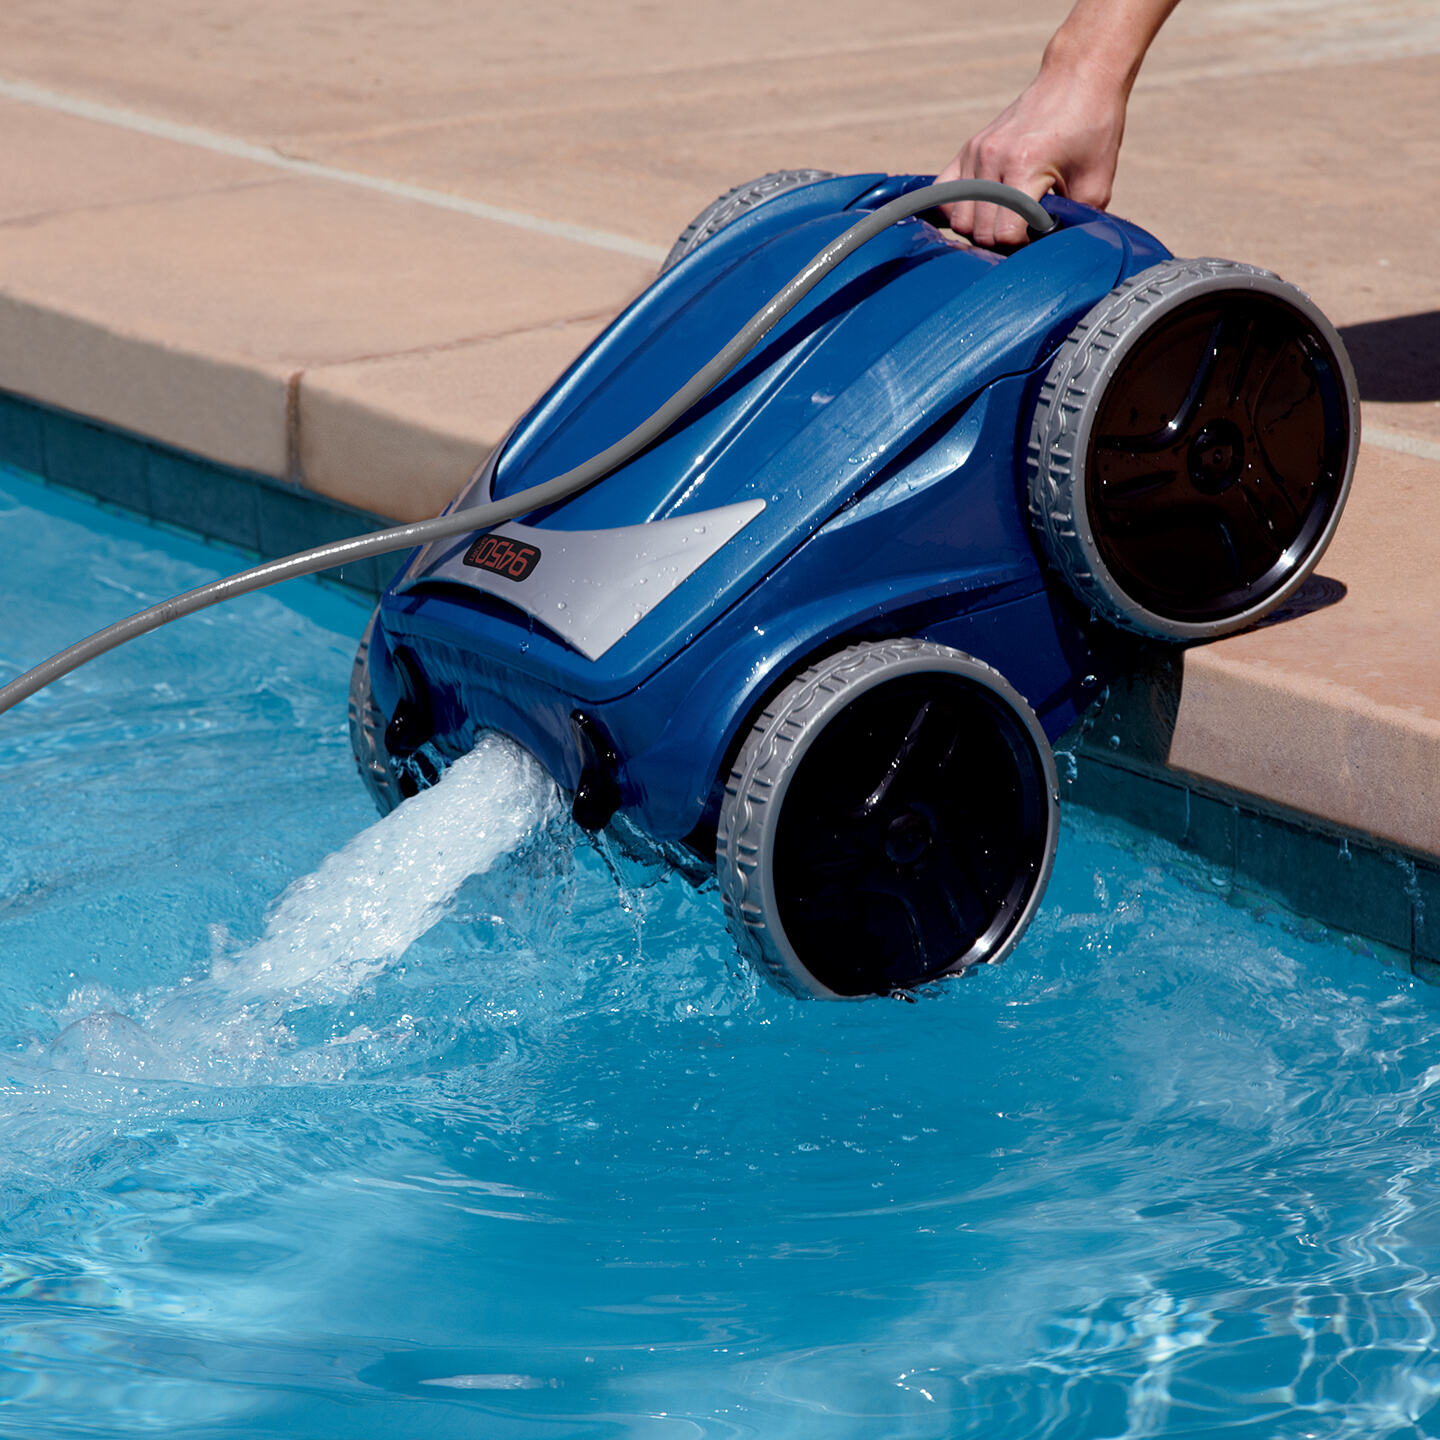 A pool vacuum cleaner filtering water into a pool